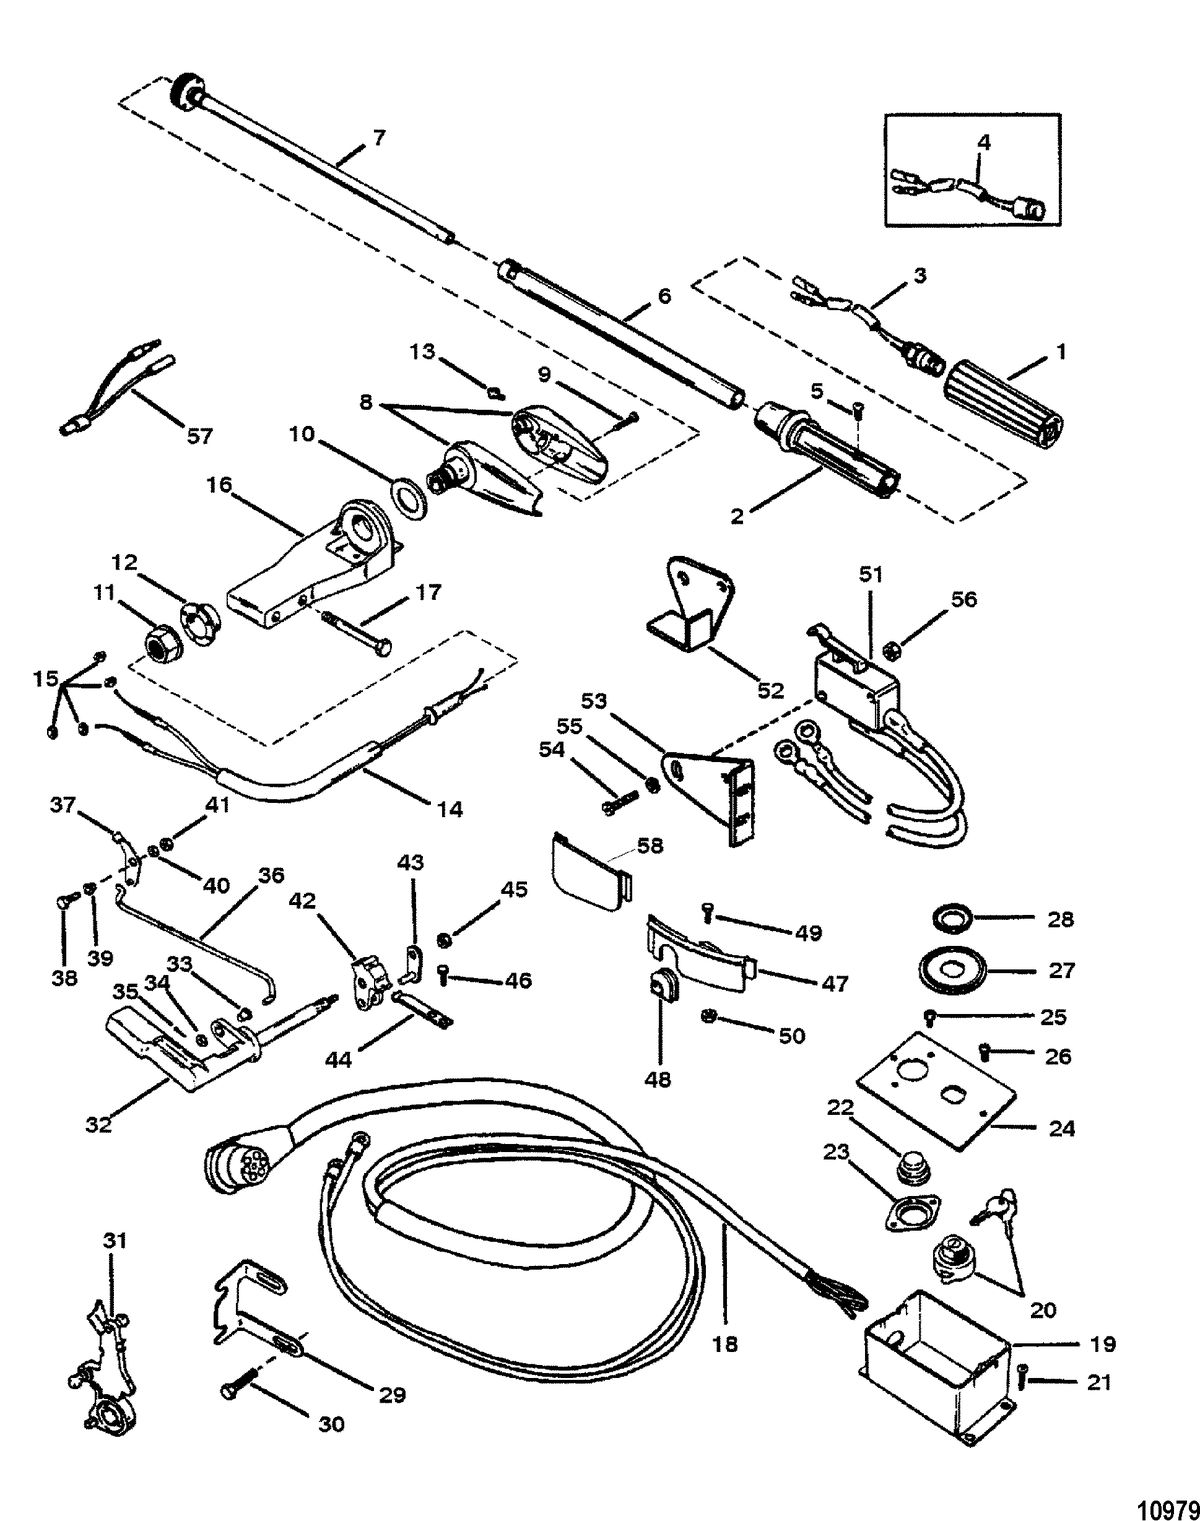 ACCESSORIES STEERING SYSTEMS AND COMPONENTS Tiller Handle Kit(94185A17 and 94185A18)